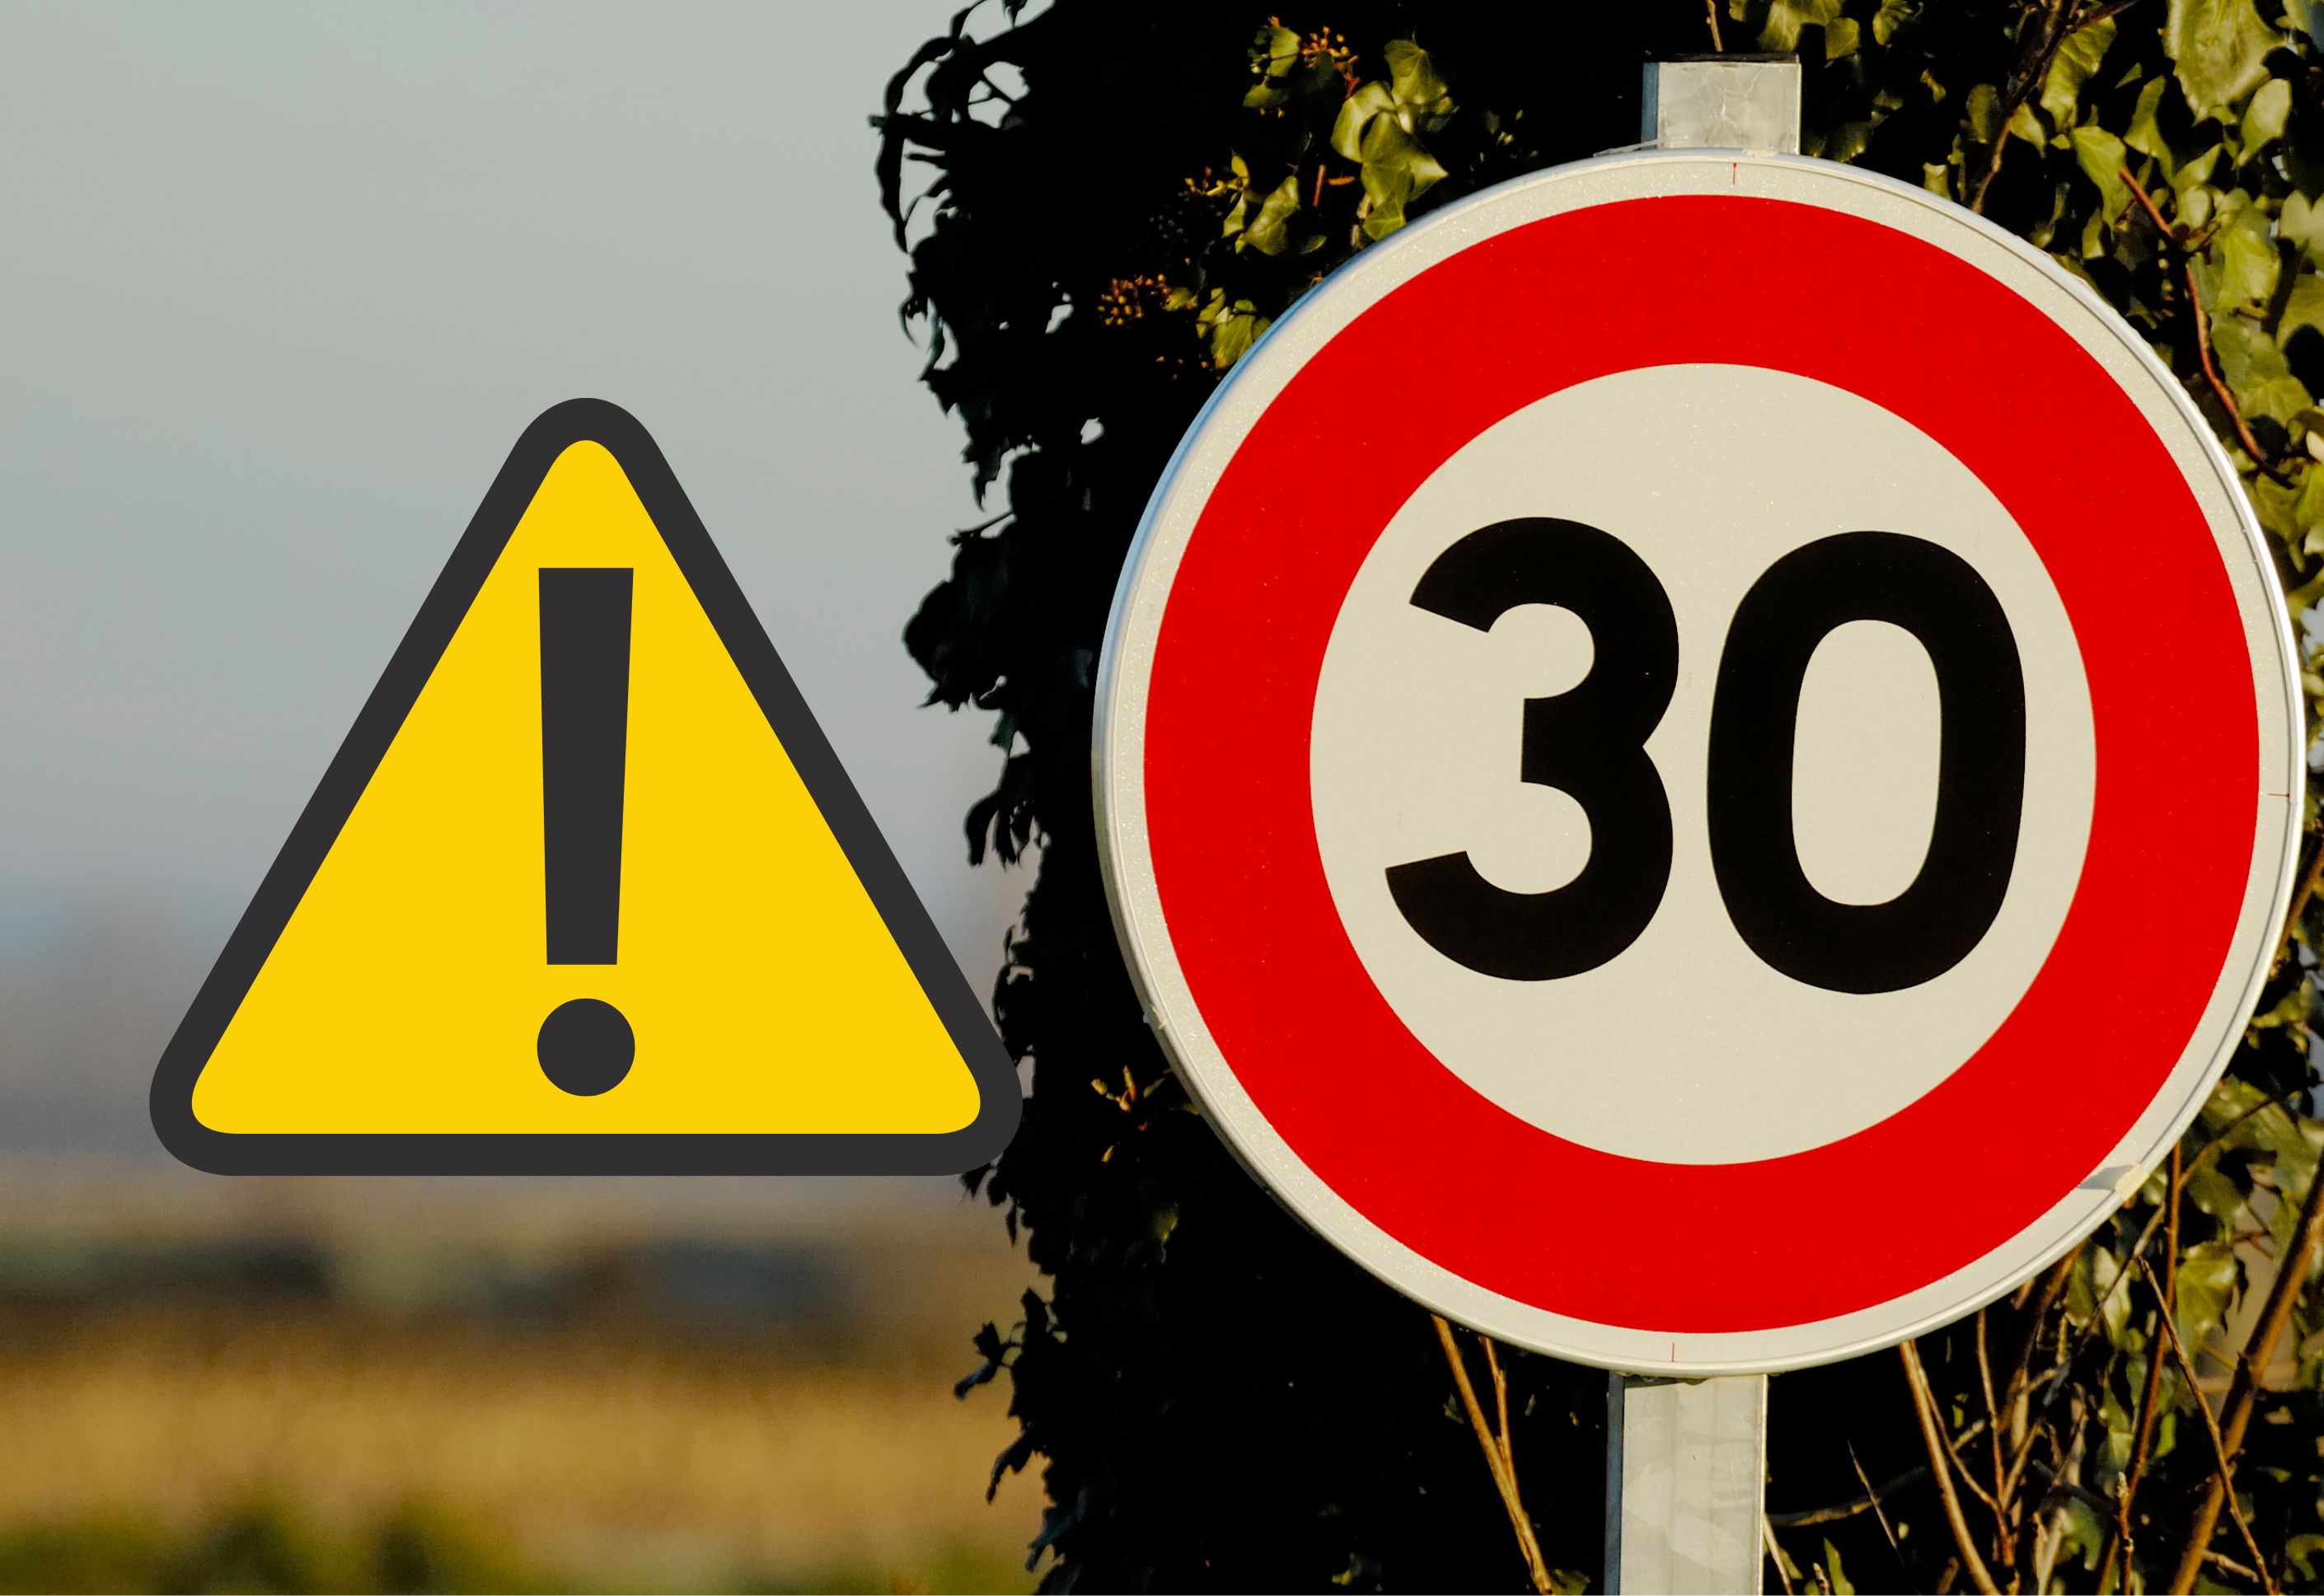 NEWS | There will be a temporary 30mph speed limit in place on busy route in Herefordshire for cycling event later this month